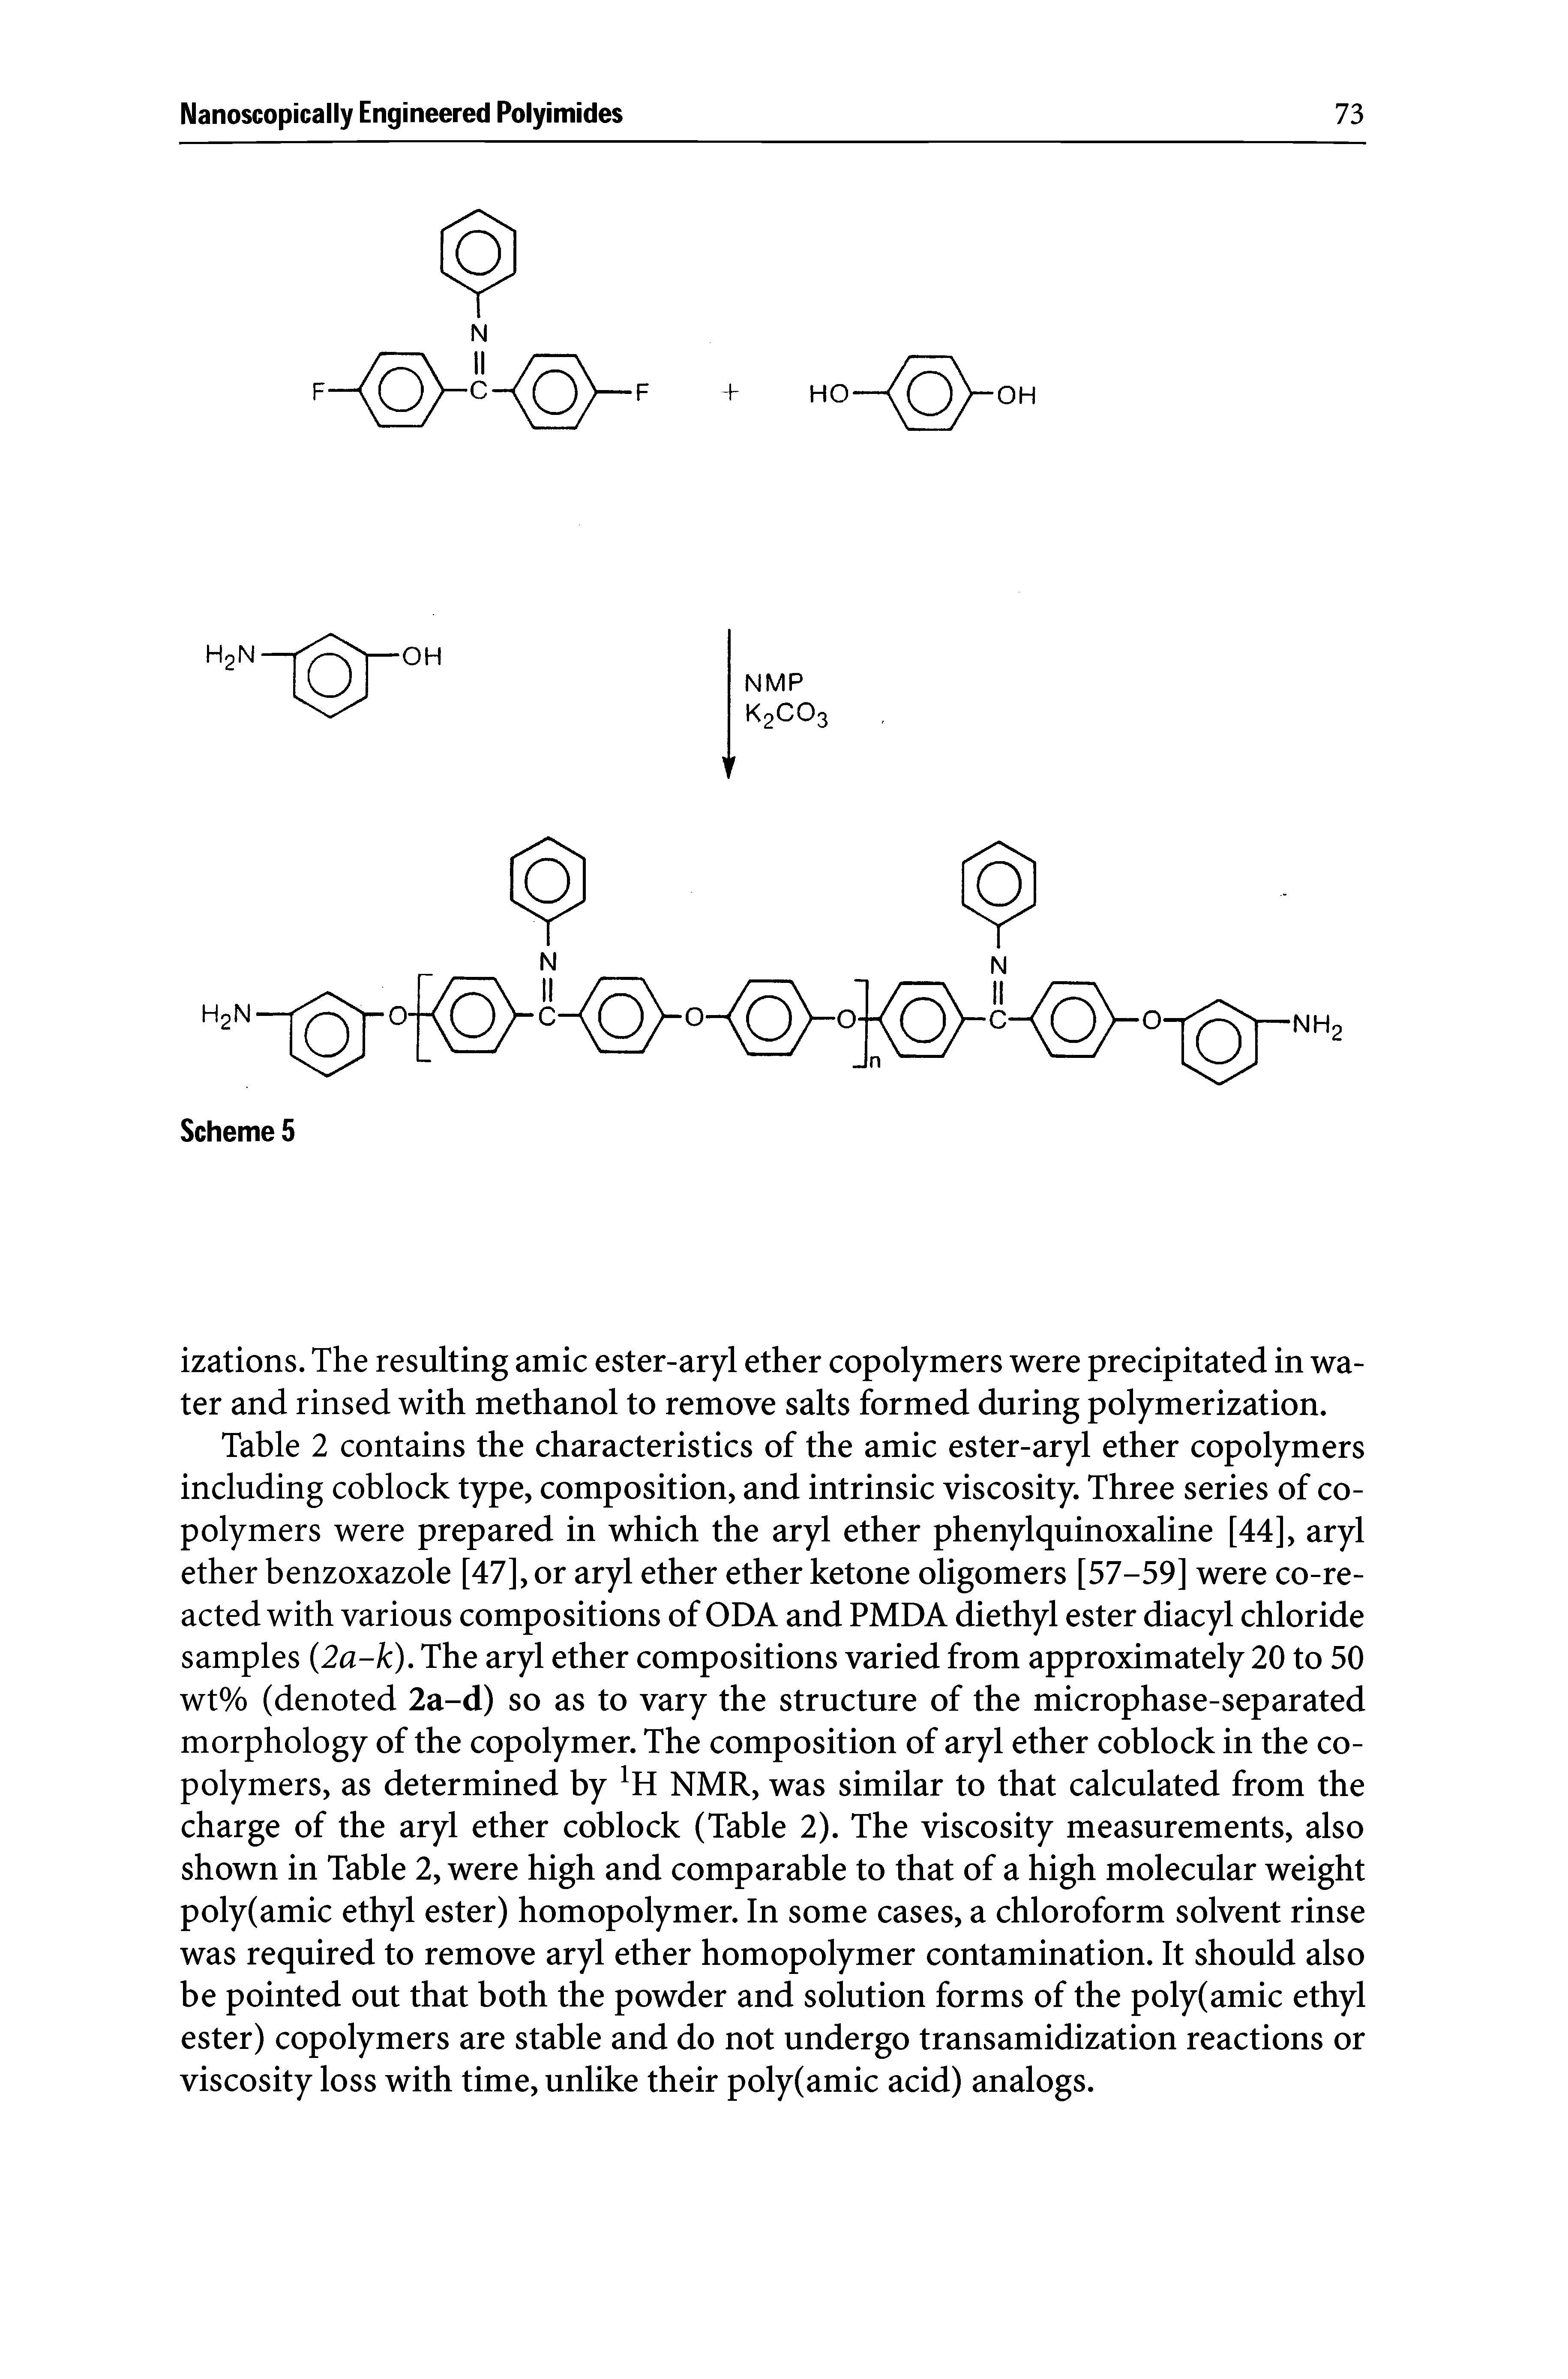 Table 2 contains the characteristics of the amic ester-aryl ether copolymers including coblock type, composition, and intrinsic viscosity. Three series of copolymers were prepared in which the aryl ether phenylquinoxaline [44], aryl ether benzoxazole [47], or aryl ether ether ketone oligomers [57-59] were co-re-acted with various compositions of ODA and PMDA diethyl ester diacyl chloride samples (2a-k). The aryl ether compositions varied from approximately 20 to 50 wt% (denoted 2a-d) so as to vary the structure of the microphase-separated morphology of the copolymer. The composition of aryl ether coblock in the copolymers, as determined by NMR, was similar to that calculated from the charge of the aryl ether coblock (Table 2). The viscosity measurements, also shown in Table 2, were high and comparable to that of a high molecular weight poly(amic ethyl ester) homopolymer. In some cases, a chloroform solvent rinse was required to remove aryl ether homopolymer contamination. It should also be pointed out that both the powder and solution forms of the poly(amic ethyl ester) copolymers are stable and do not undergo transamidization reactions or viscosity loss with time, unlike their poly(amic acid) analogs.